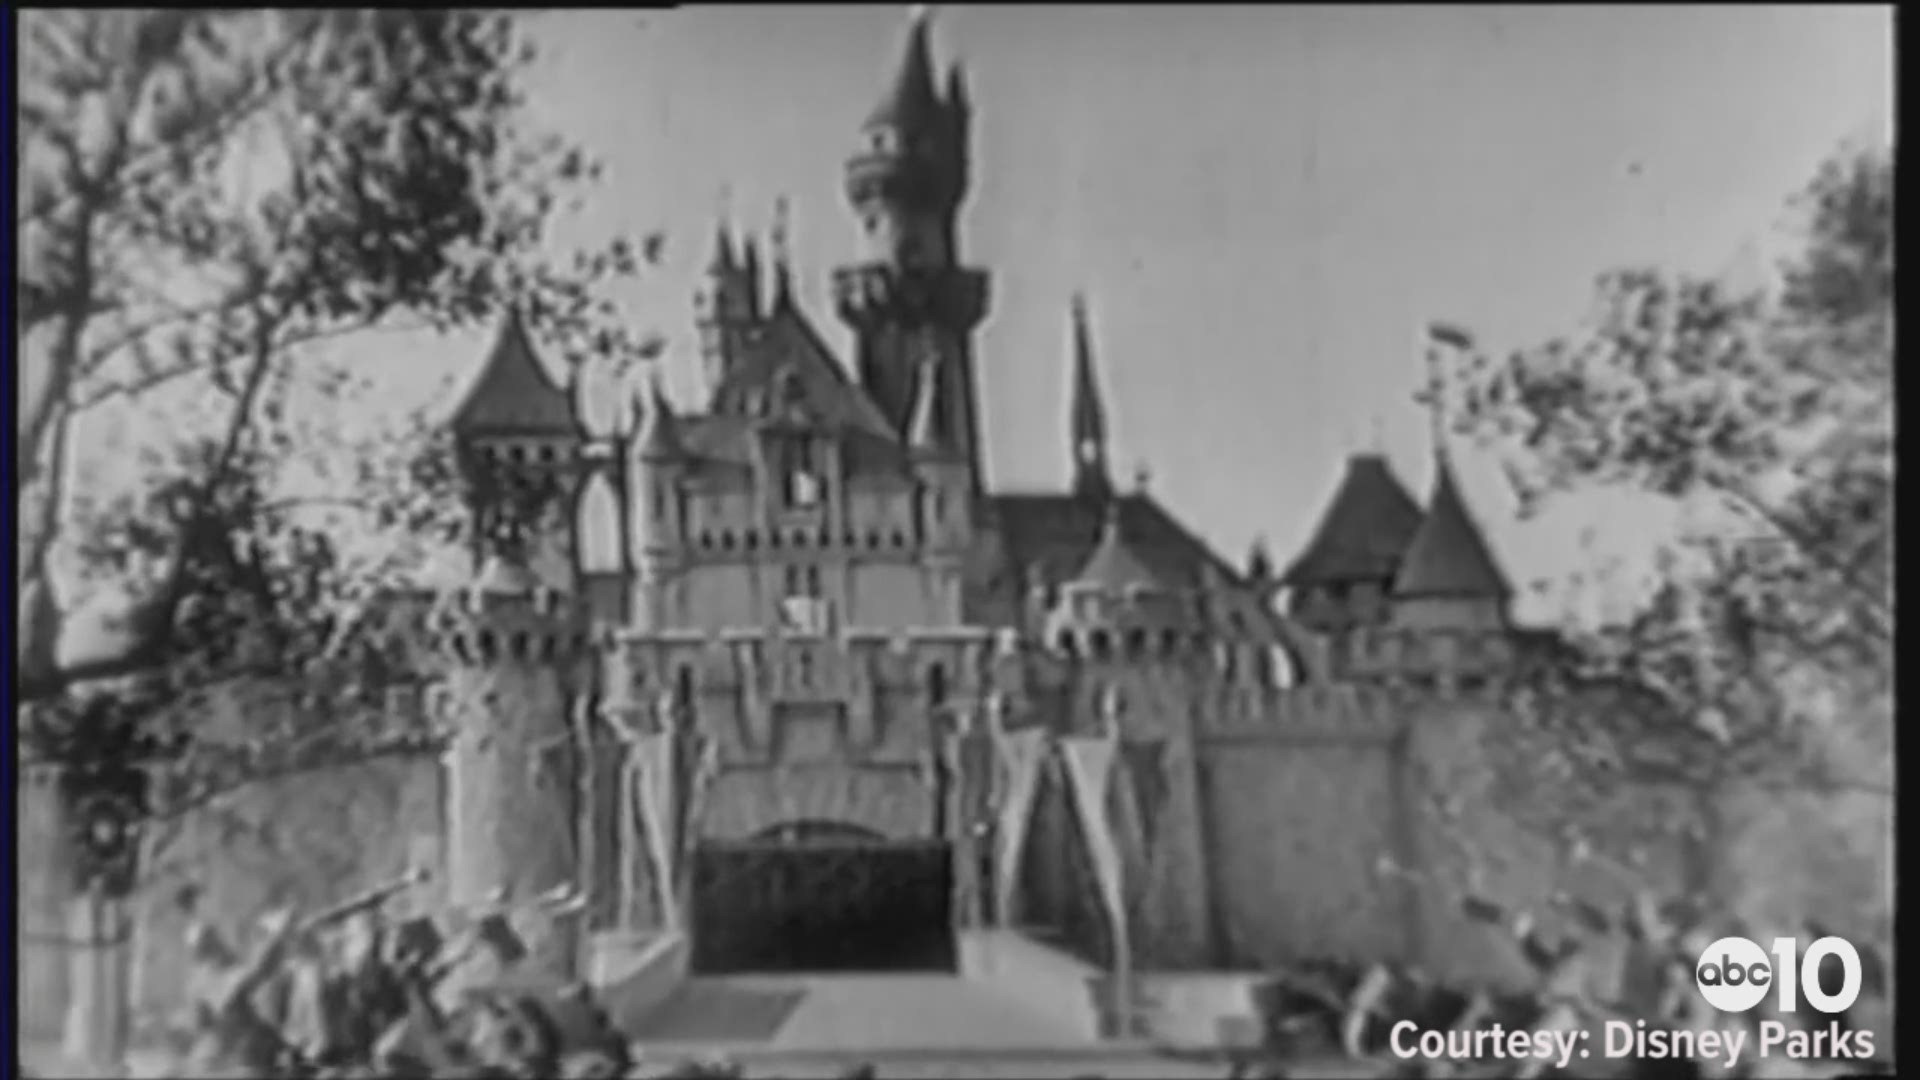 On July 17, 1955, Disneyland opened the gates to the happiest place on earth! Share your favorite pictures taken at Disneyland in the comments! (Video courtesy: Disney Parks)